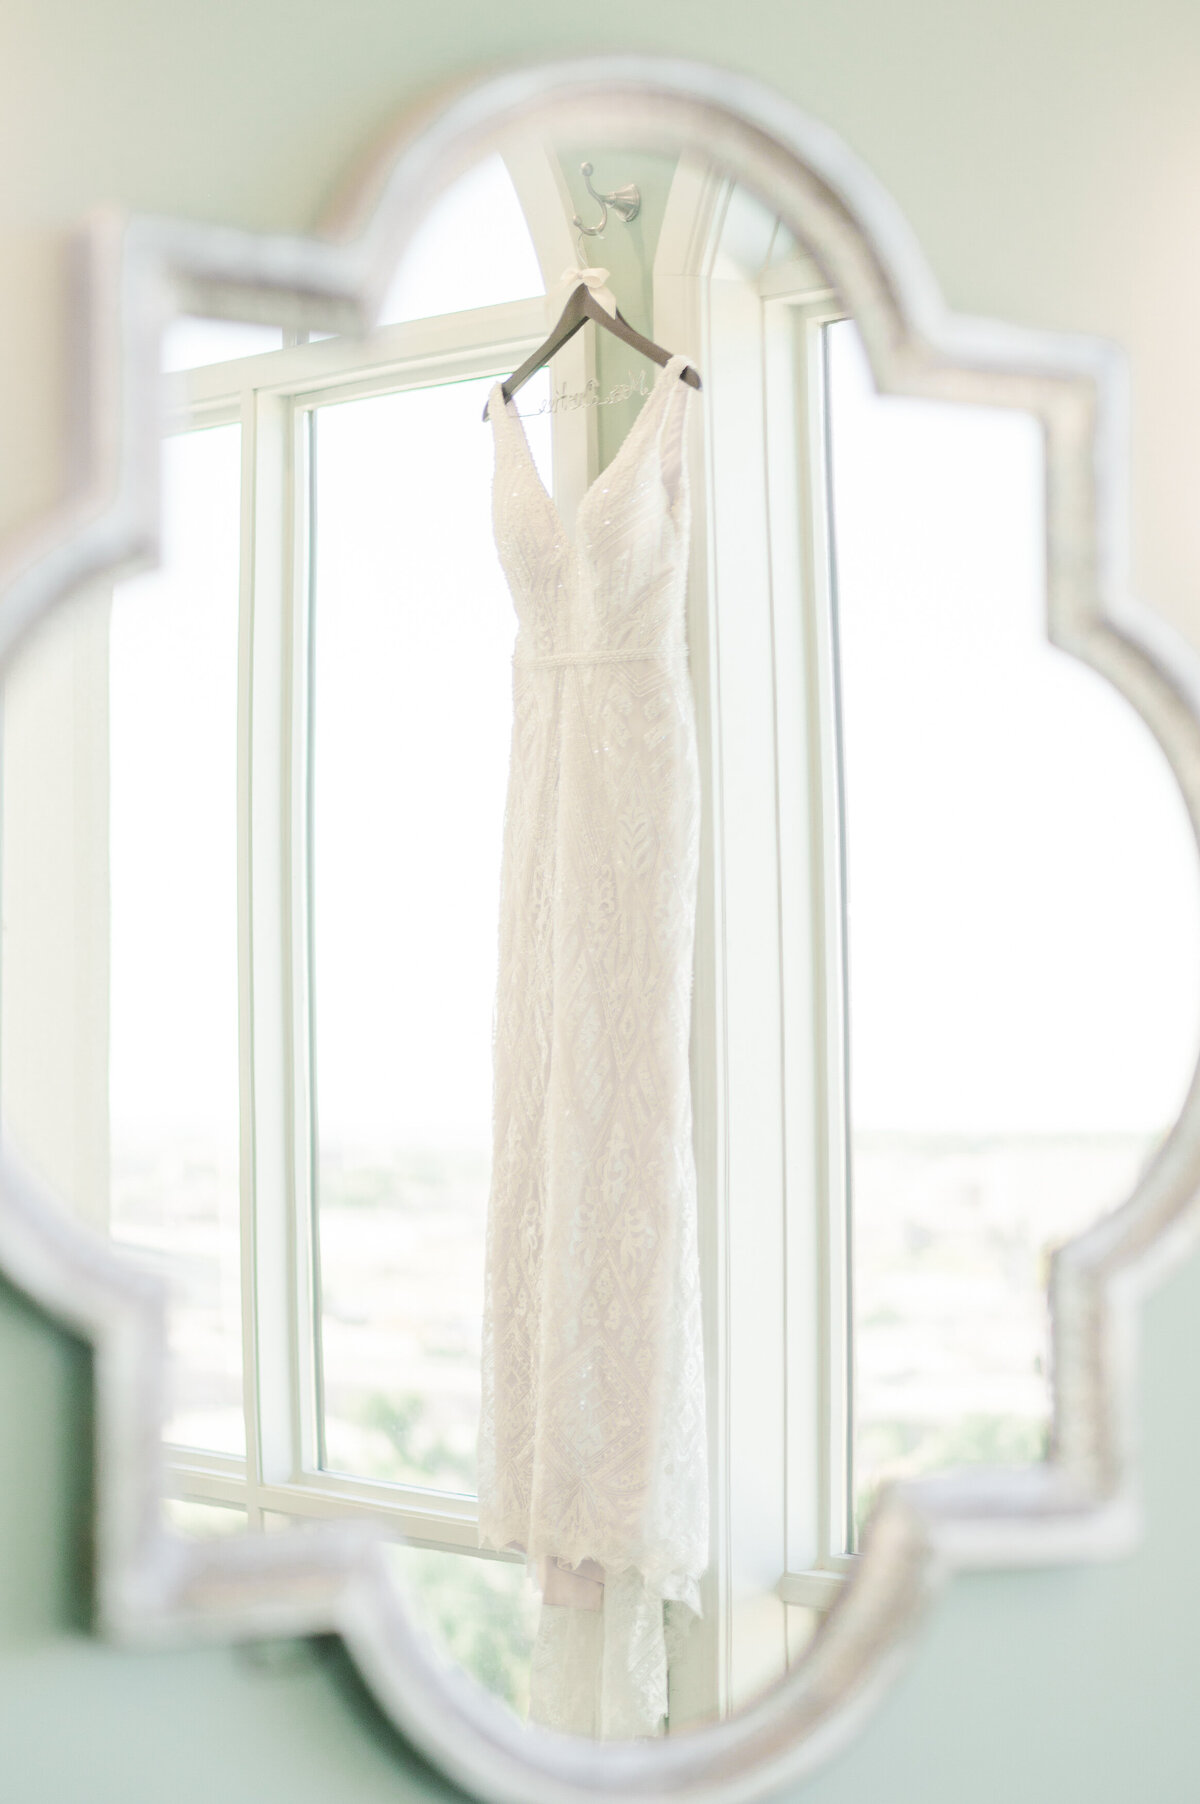 A white wedding dress hanging in the window photographed through a mirror at the Pinery at the Hill.